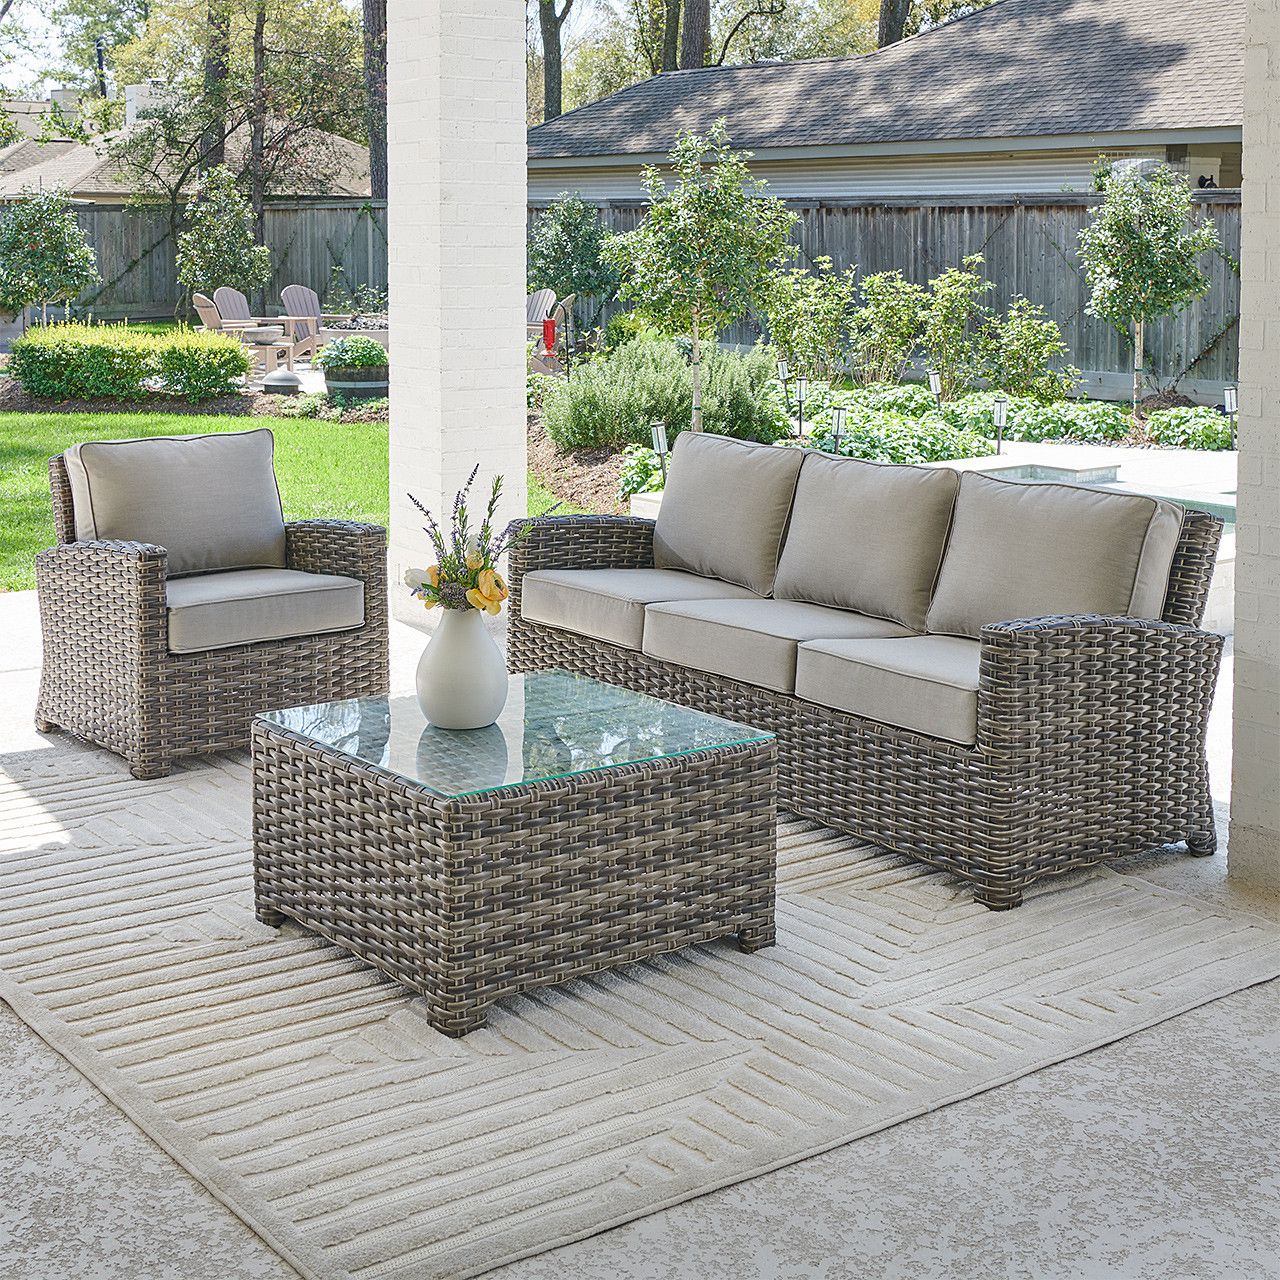 Contempo Husk Outdoor Wicker with Cushions 3 Piece Sofa Group + 32 in. Sq. Glass Top Coffee Table